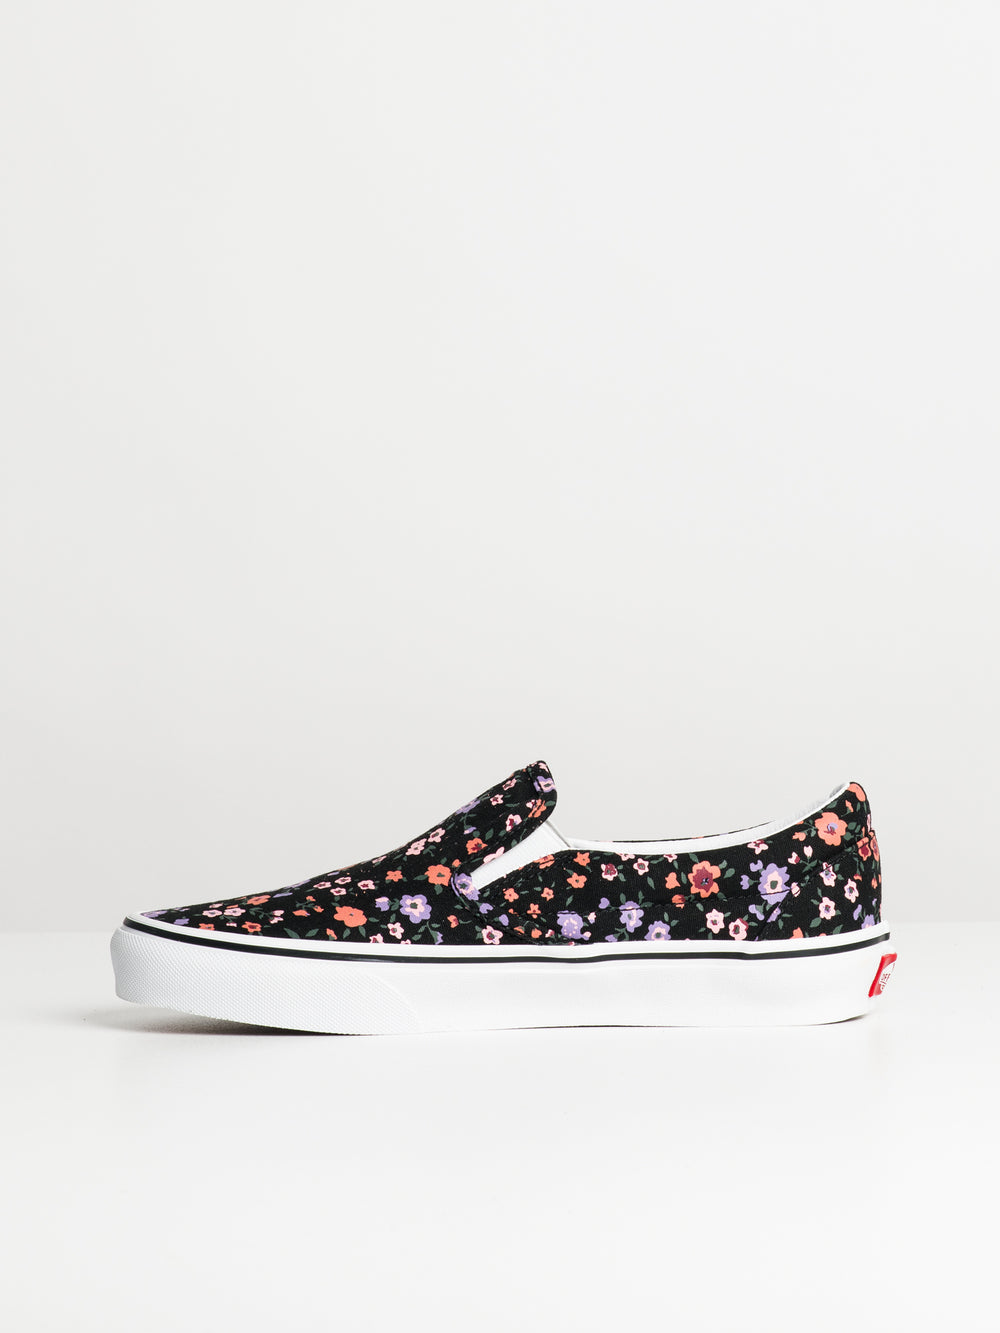 WOMENS VANS CLASSIC SLIP-ON FLORAL - CLEARANCE